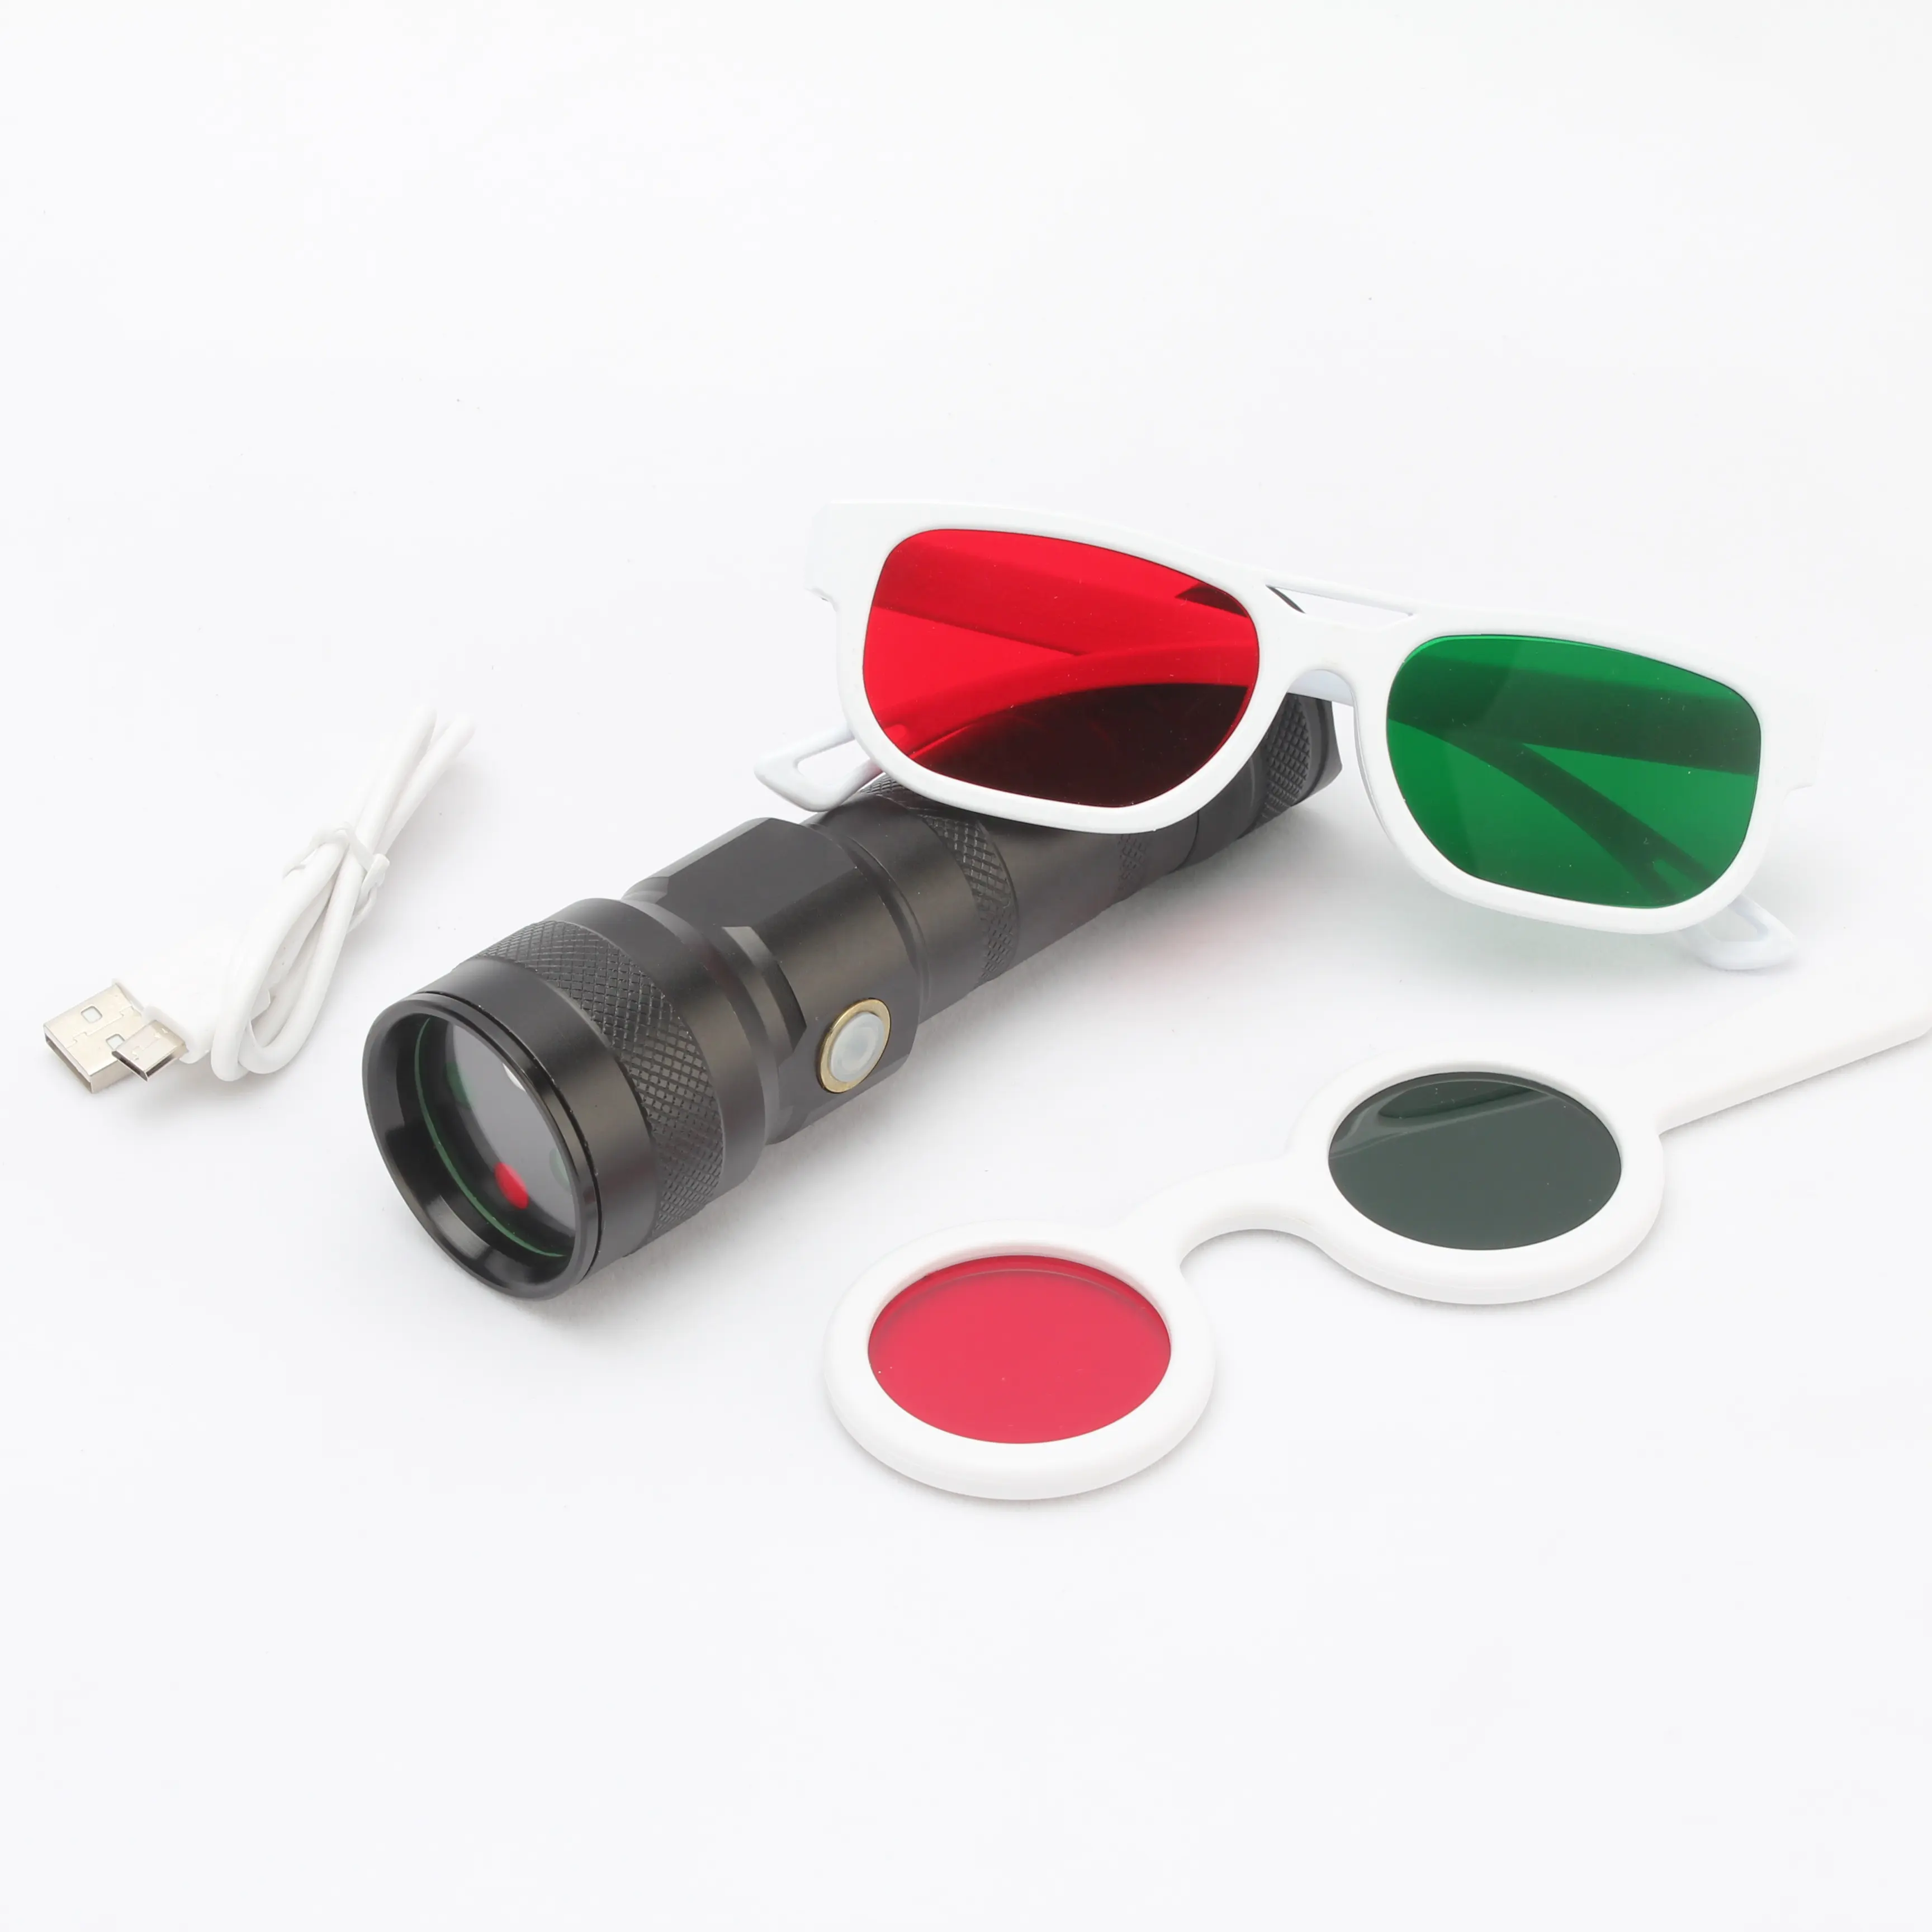 Hot Selling Wholesale Price Ophthalmic Equipment Optical Worth Four-Dot Flashlight